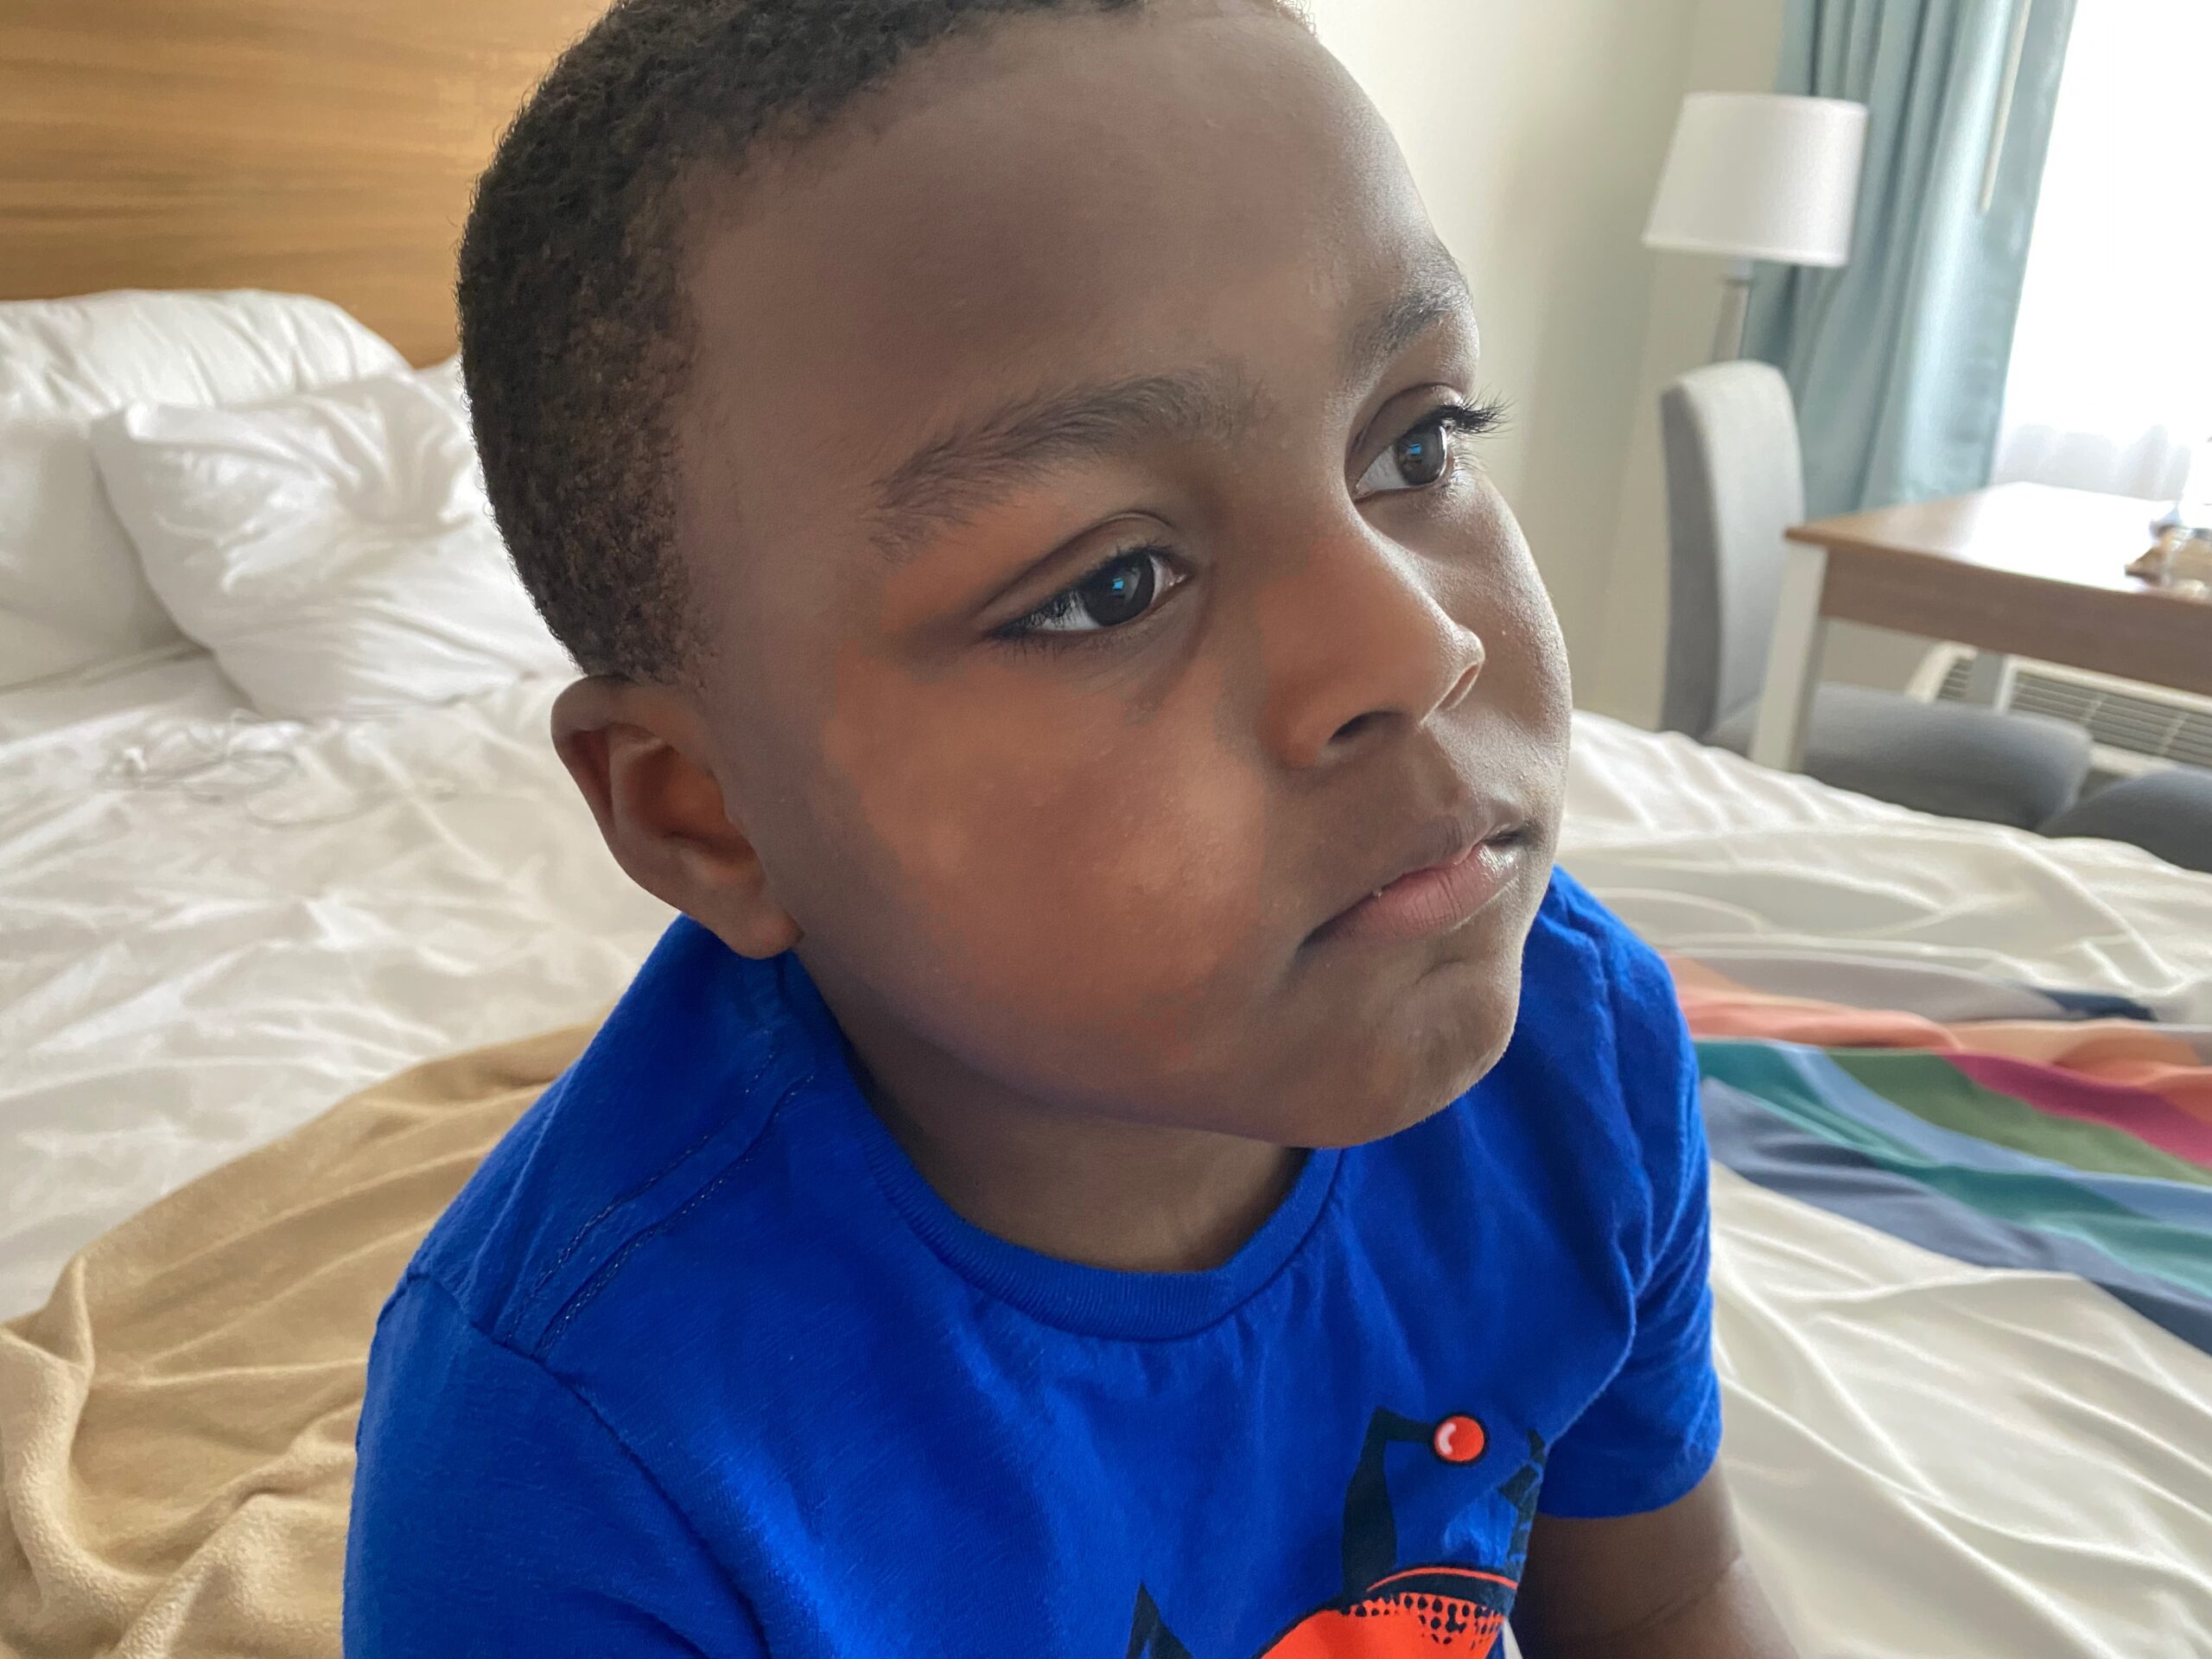 What Are The Lighter Or White Spots On My Black Childs Face